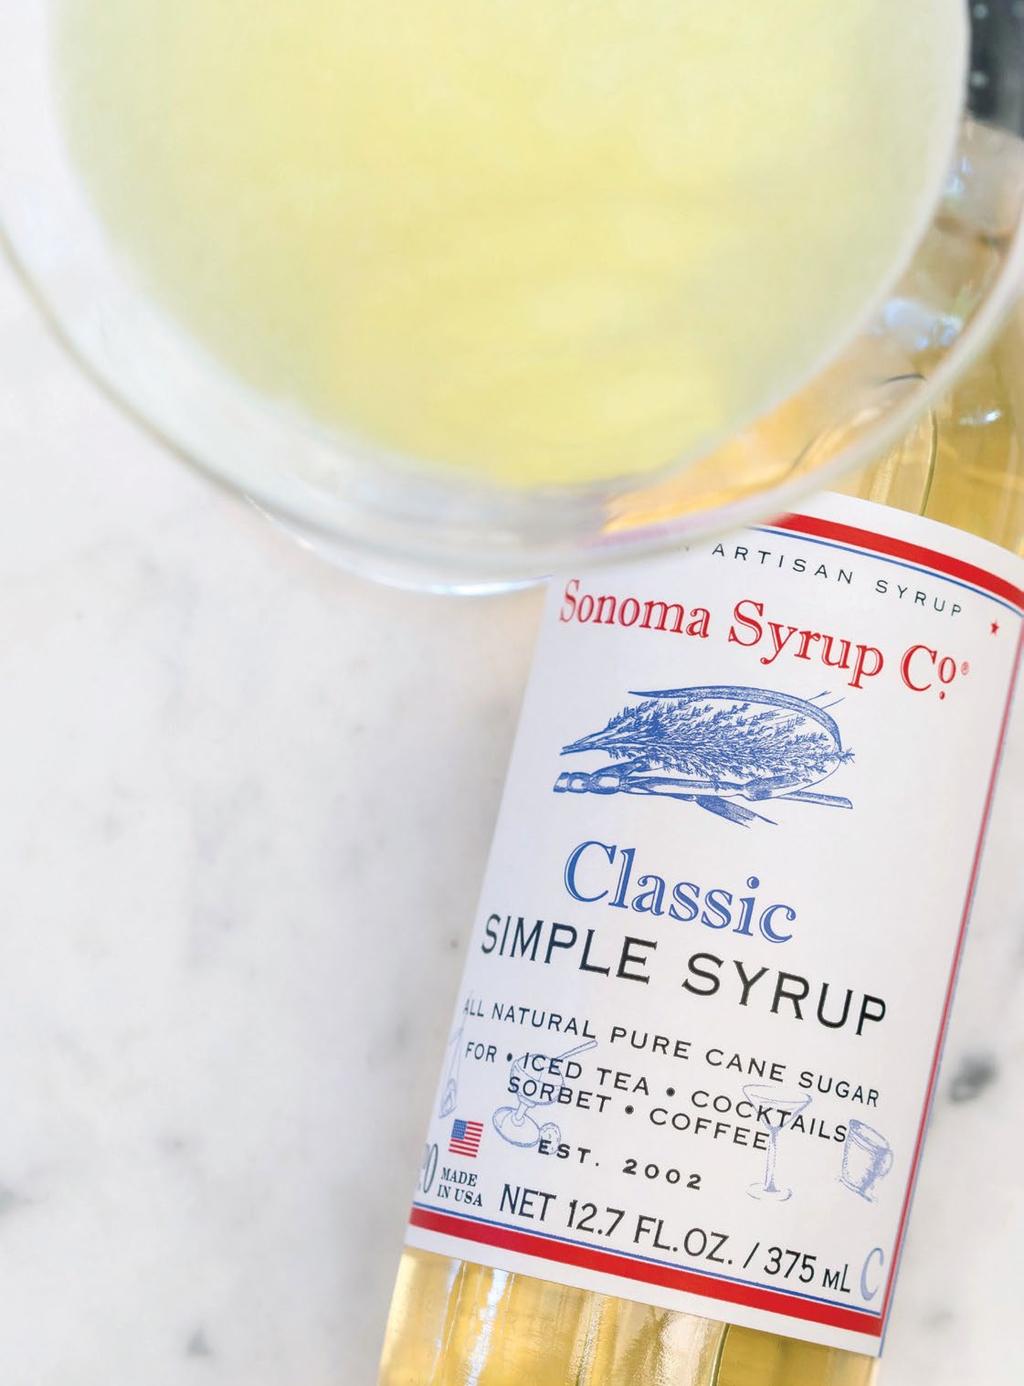 BEST SELLER Keep It Simple PURE INFUSED SWEETNESS Simple Syrup is the most universal bar mixer Classic Simple Syrup 12.7 oz. SS-00 $12.95 25.4 oz. SS-200 $16.